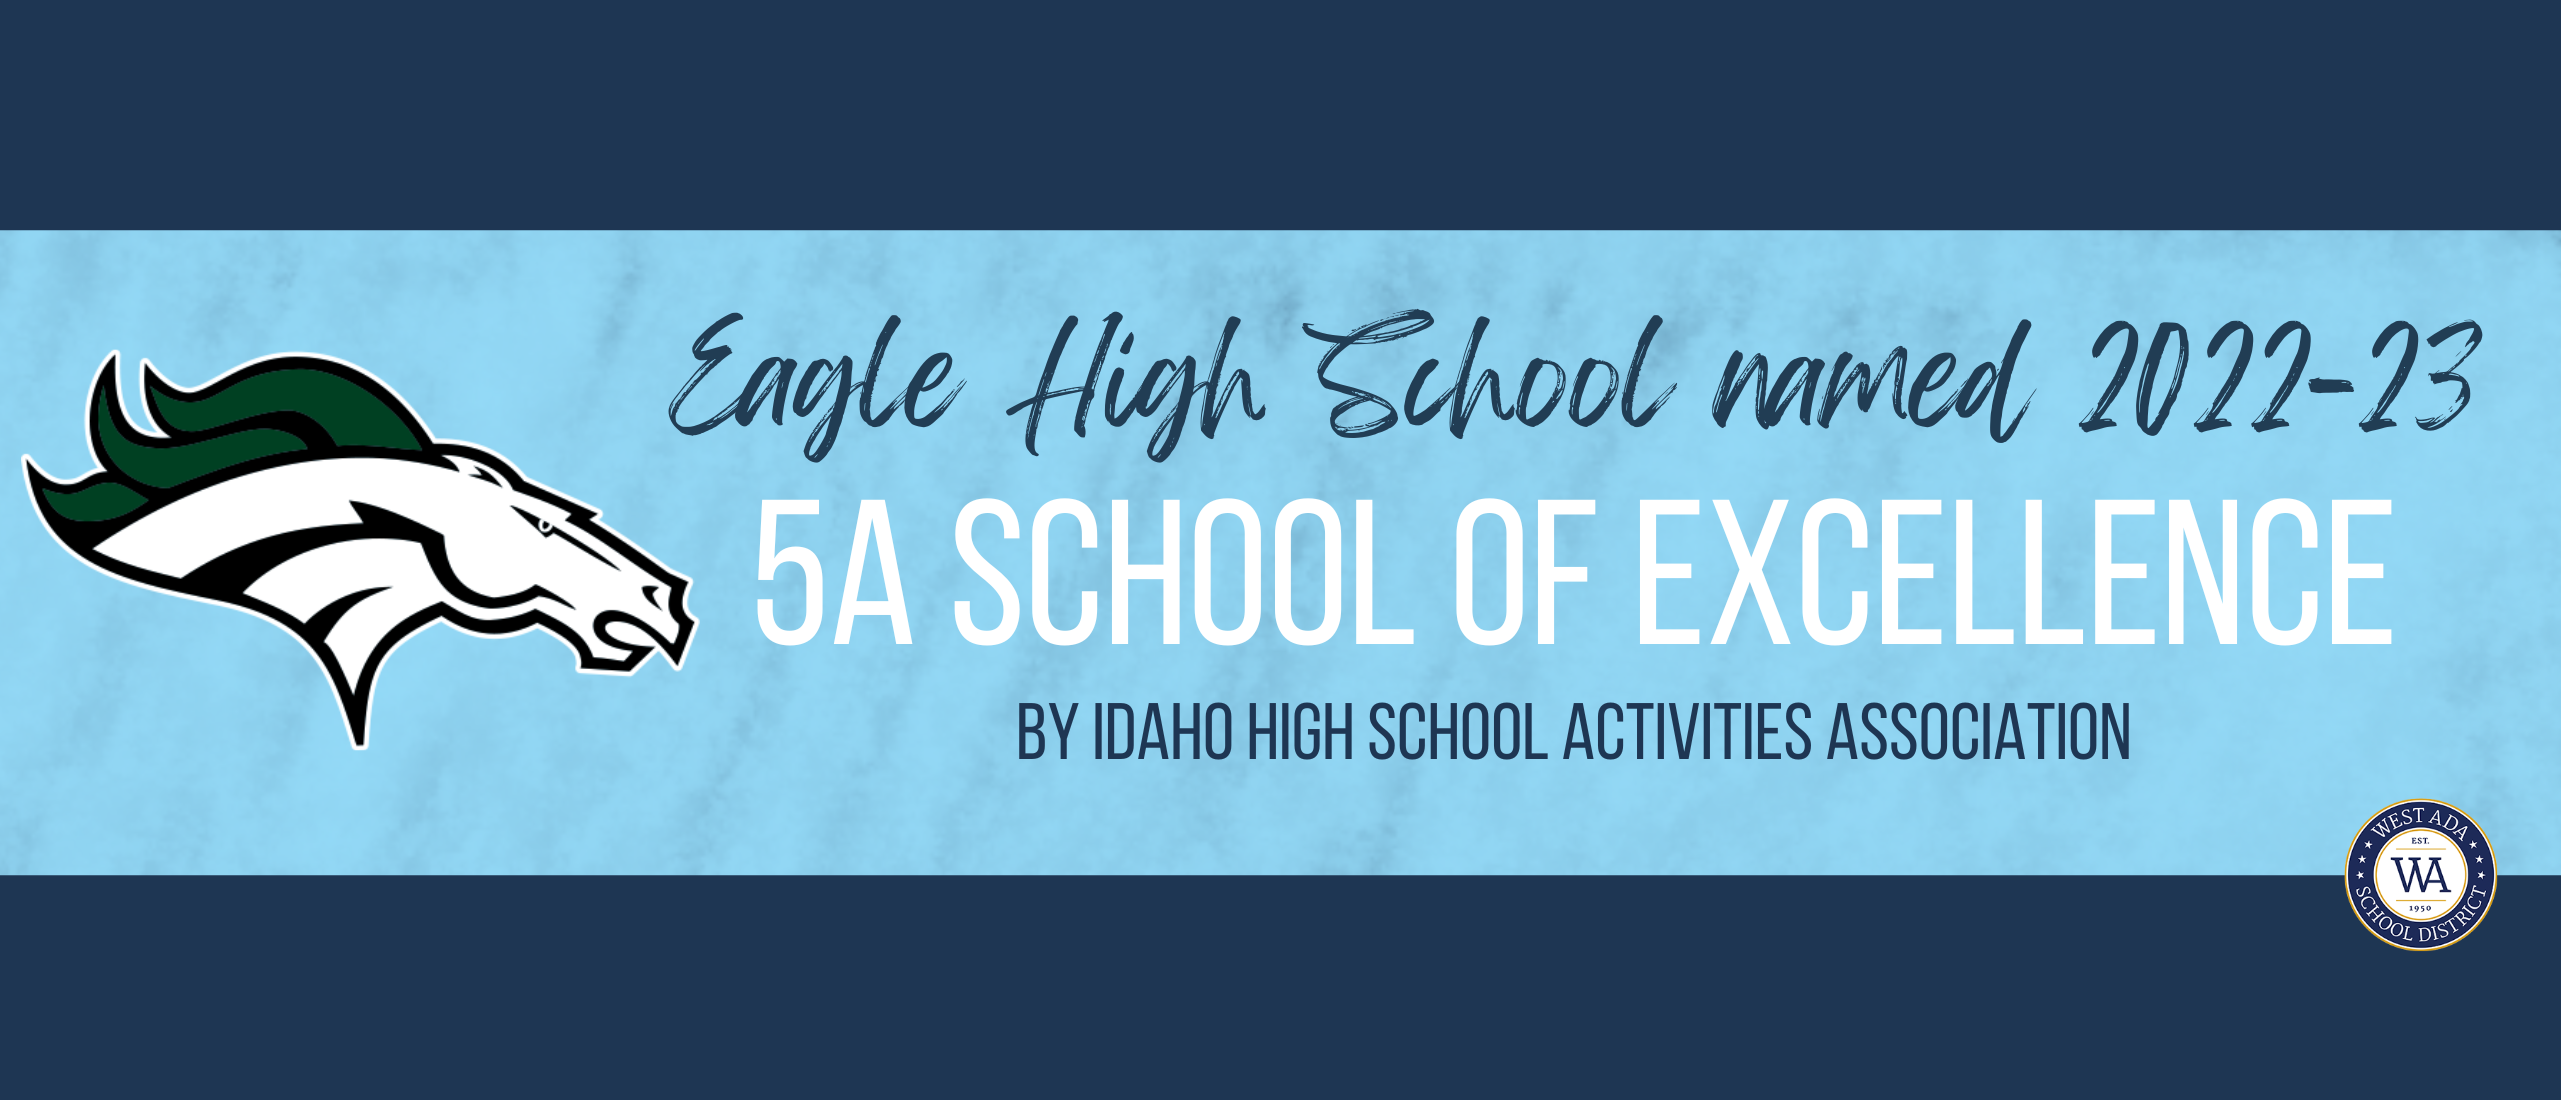 eagle high school - school of excellence by ihsaa